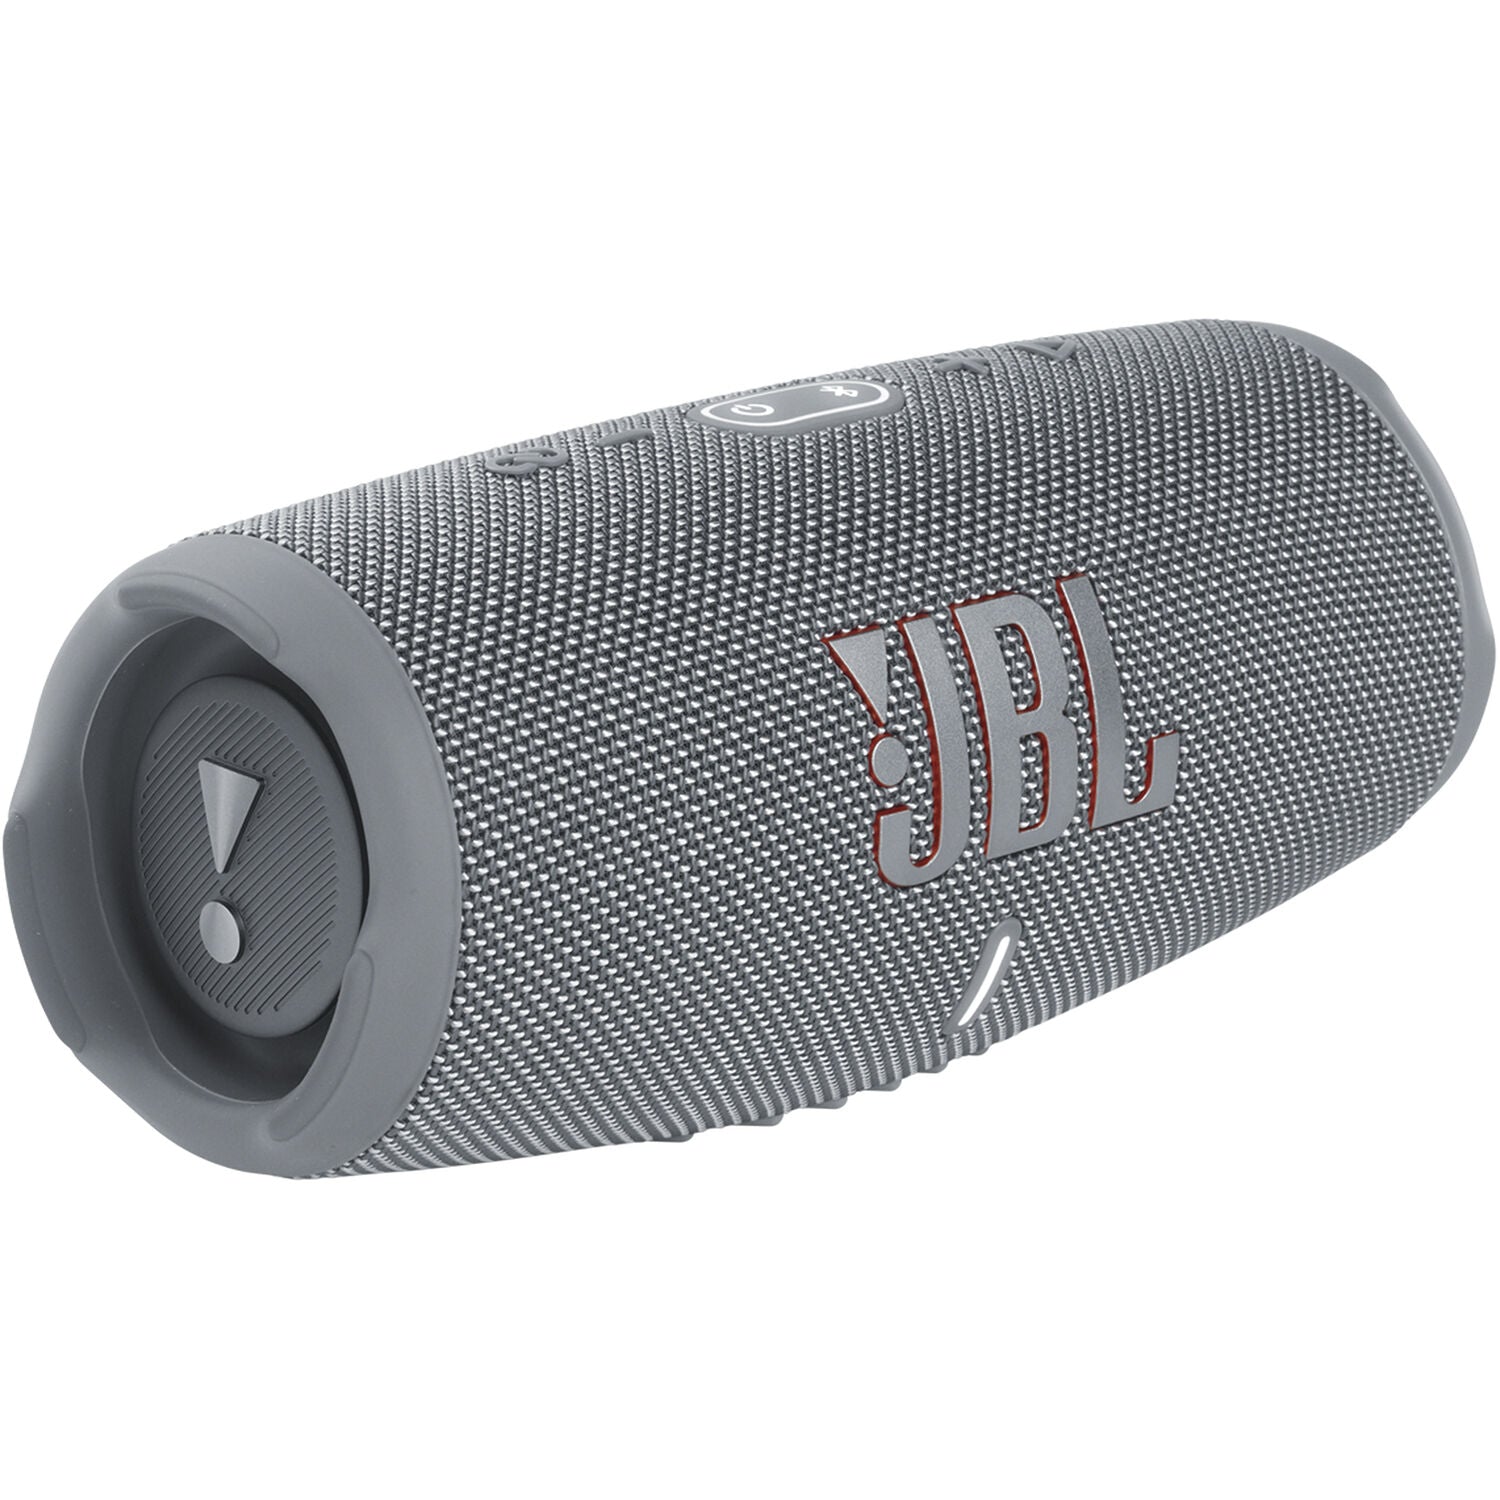 JBL Go Review: Compact Body, Competent Sound